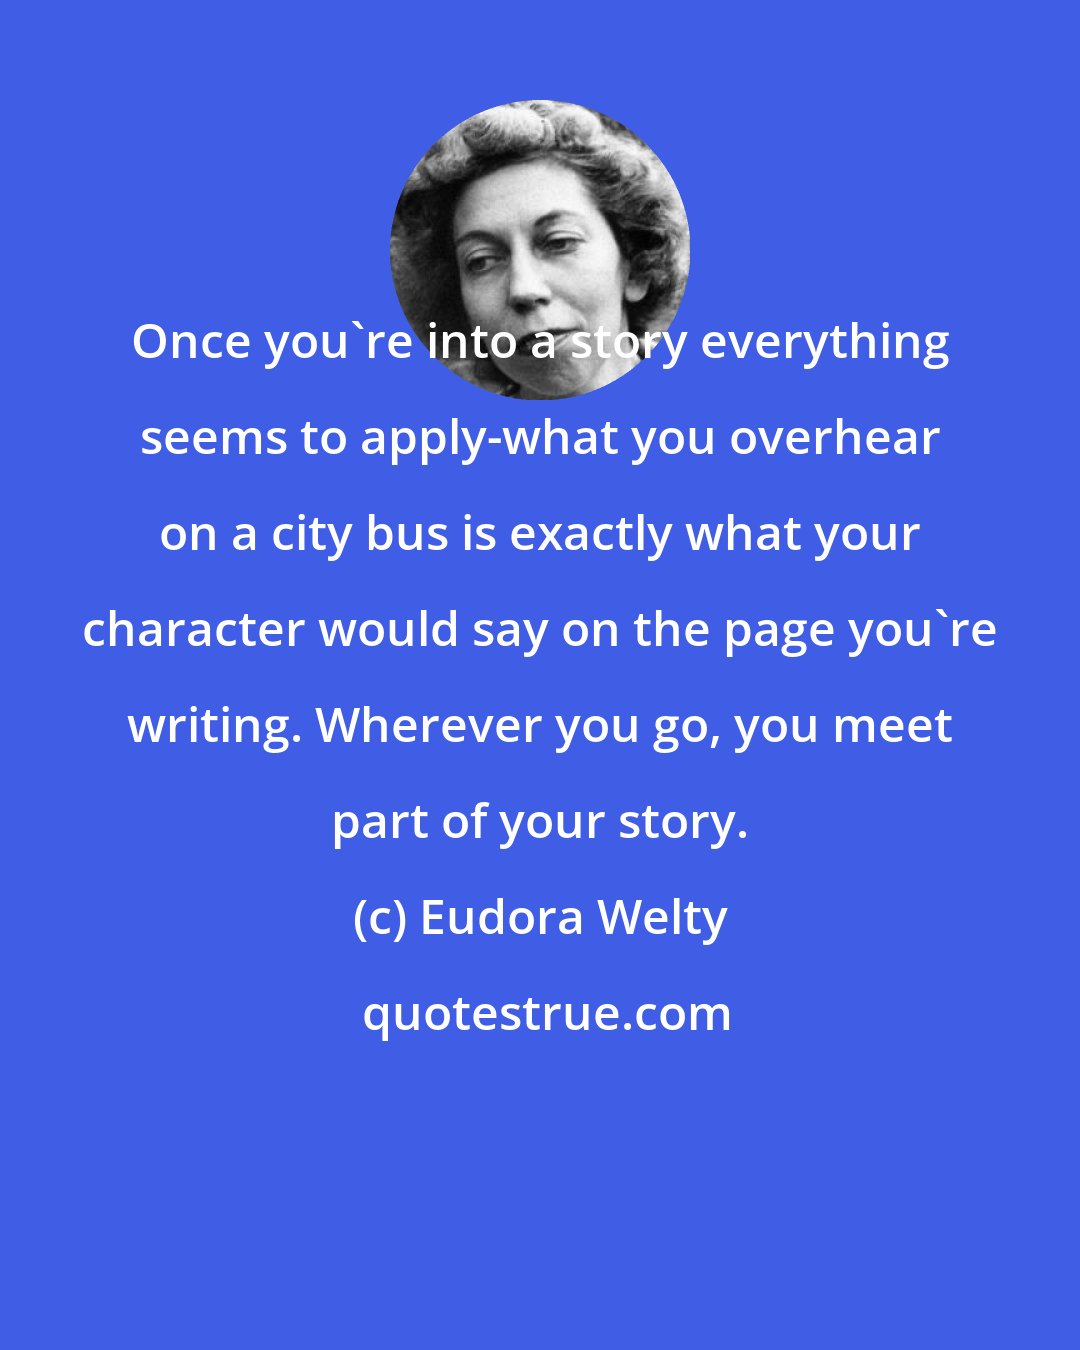 Eudora Welty: Once you're into a story everything seems to apply-what you overhear on a city bus is exactly what your character would say on the page you're writing. Wherever you go, you meet part of your story.